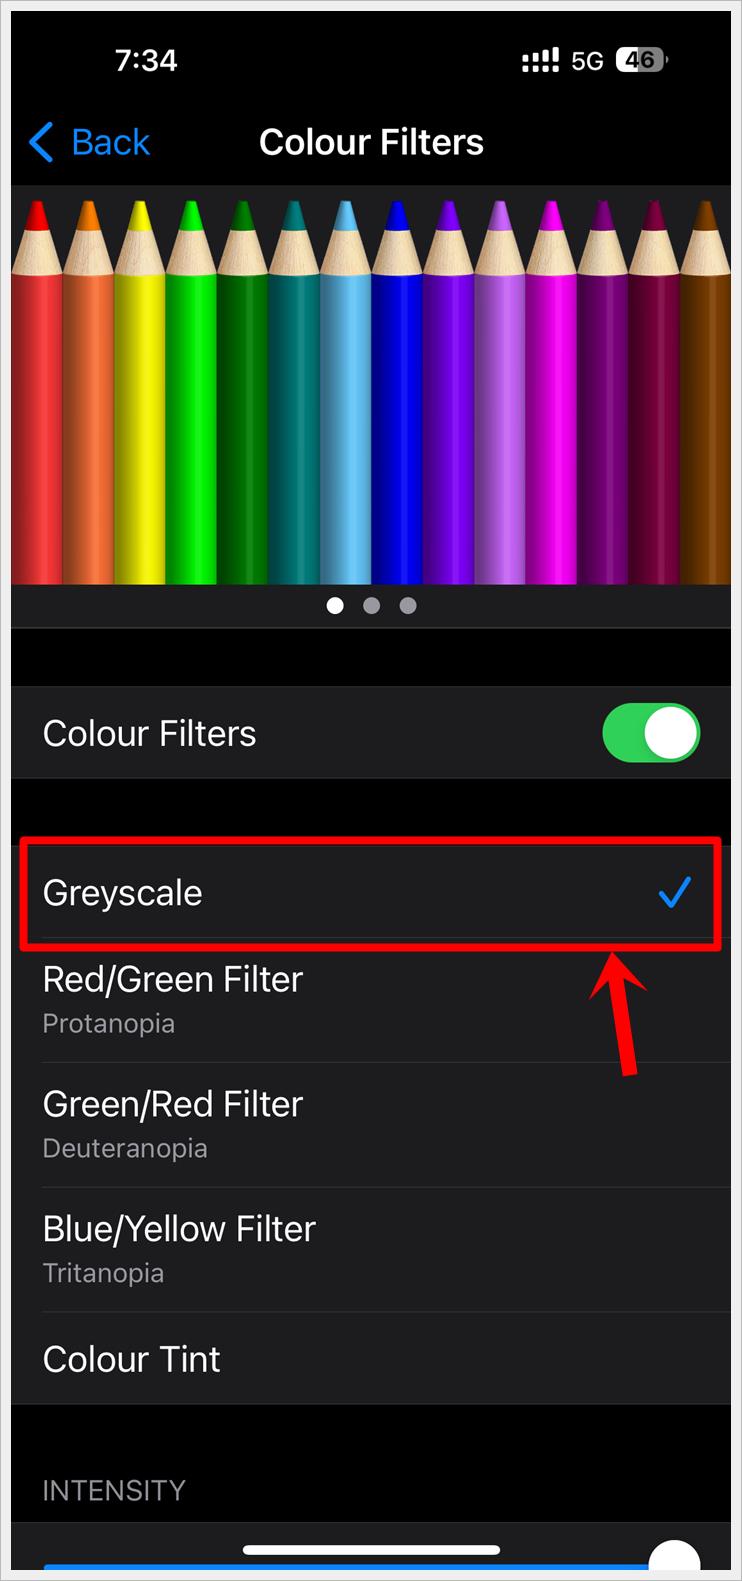 How to Make Your Phone Screen Display in Black and White: This image shows a screenshot of the 'Color Filters' page of an iPhone. The 'Color Filters' has been toggled on and the 'Grayscale' option highlighted.